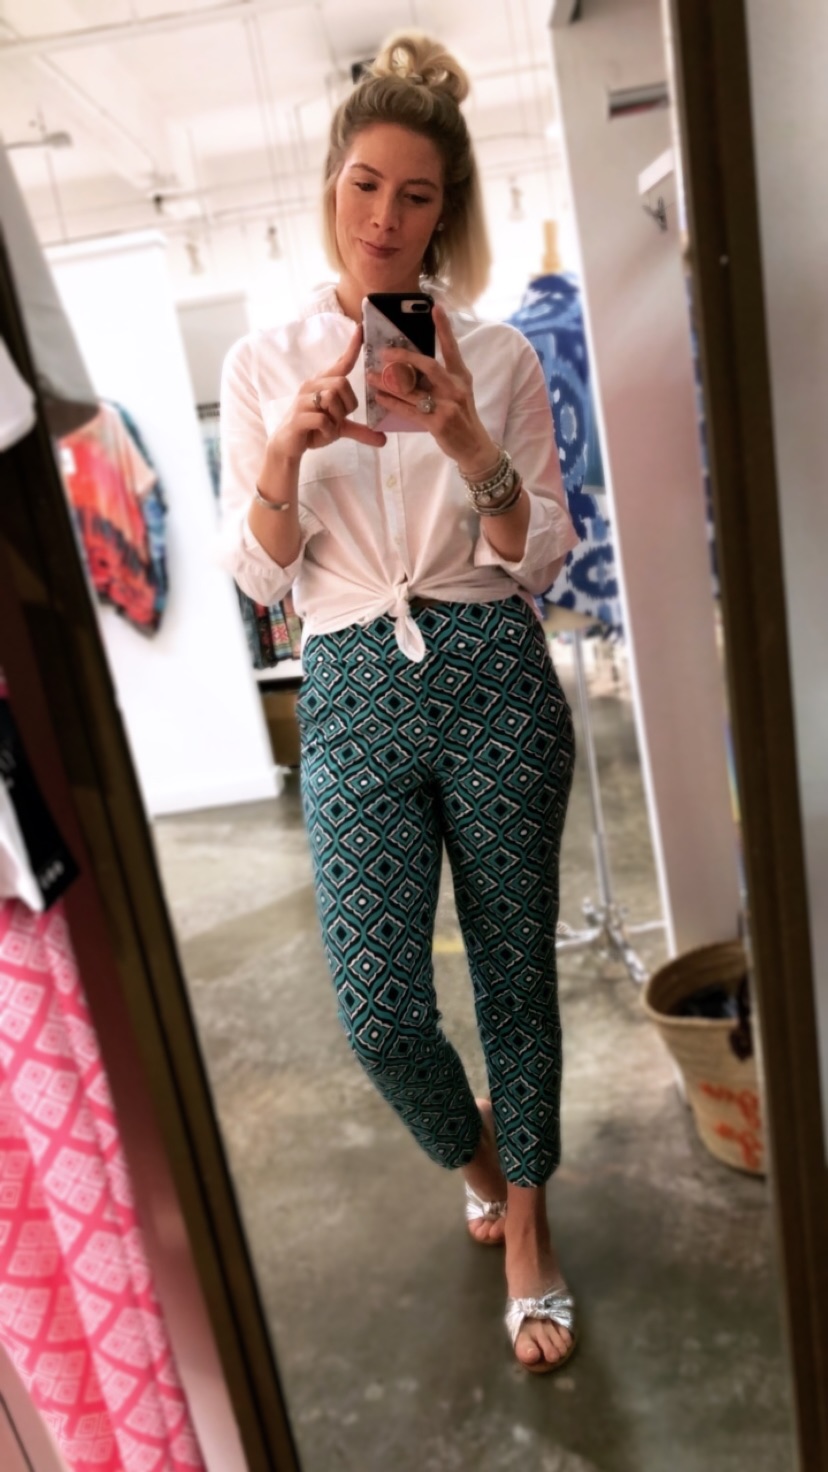 Panama Pant in Trevino Aqua Navy from The Katherine Way Resort 2018 October Collection worn by Fashion Blogger Stephanie Mack of The Borrowed Babes Fashion Blog